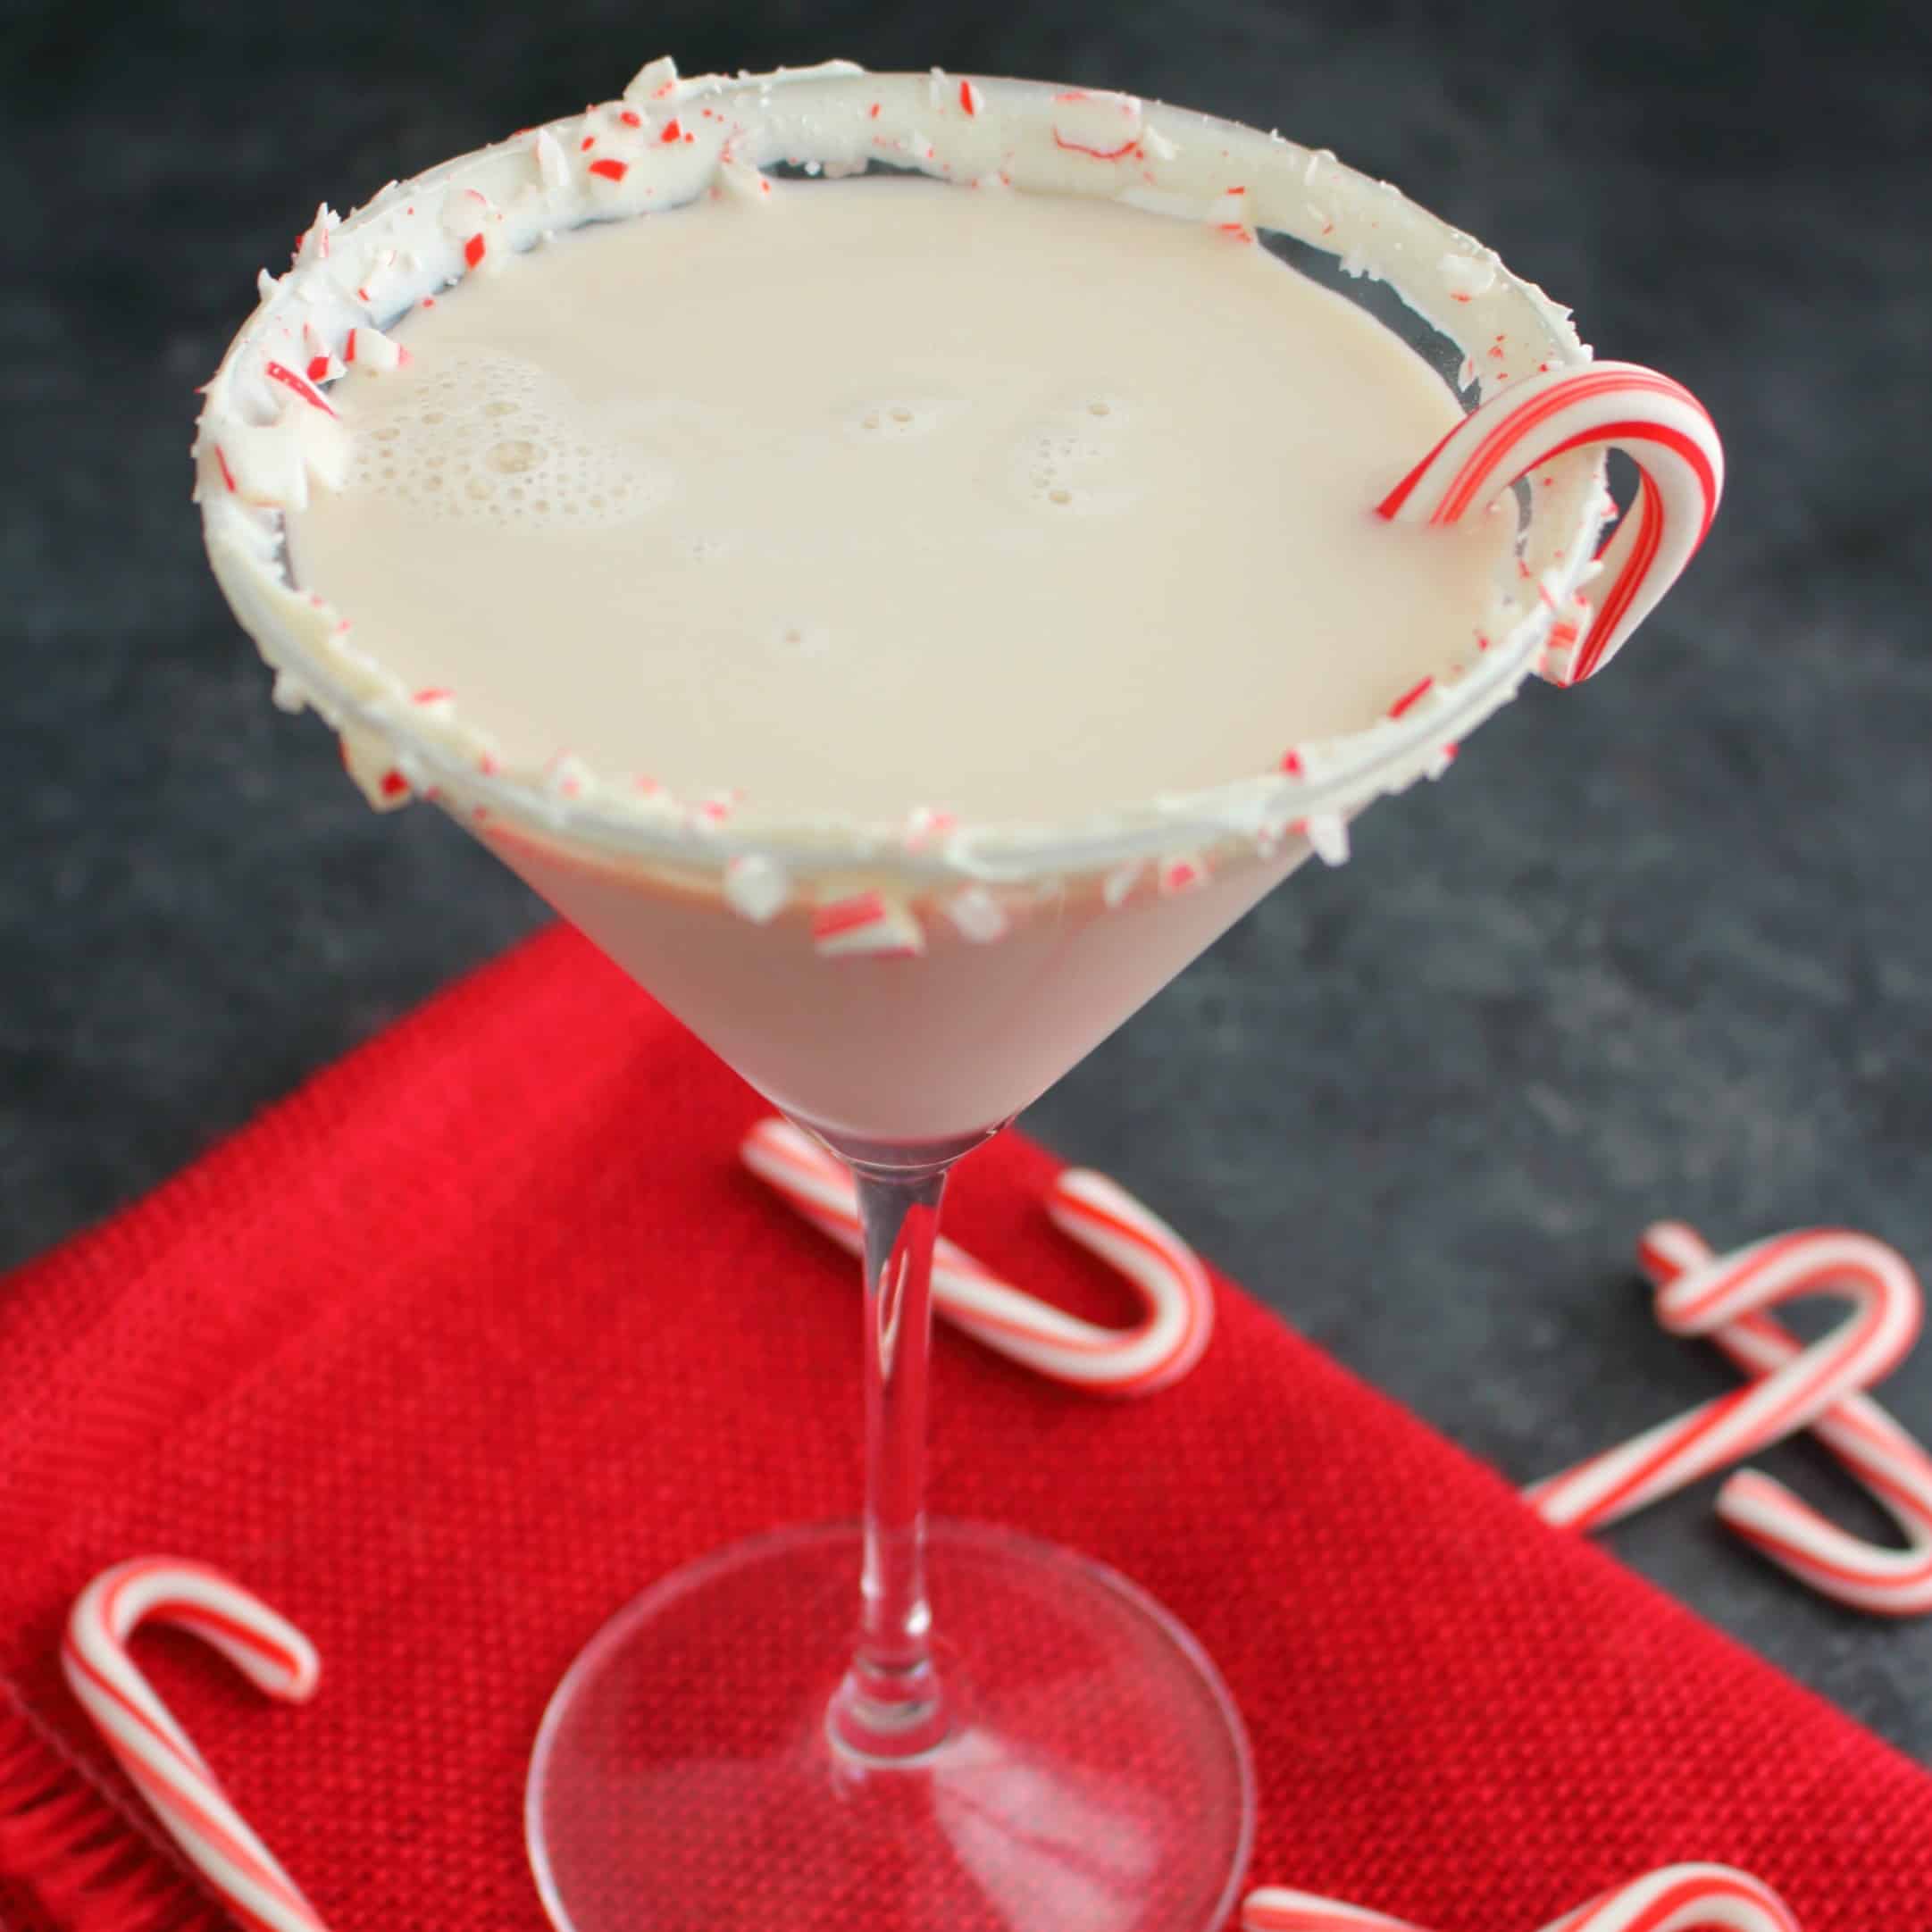 Made with Rum Chata and peppermint schnapps, this Peppermint Bark Martini is the ultimate holiday cocktail perfect for celebrating the season!